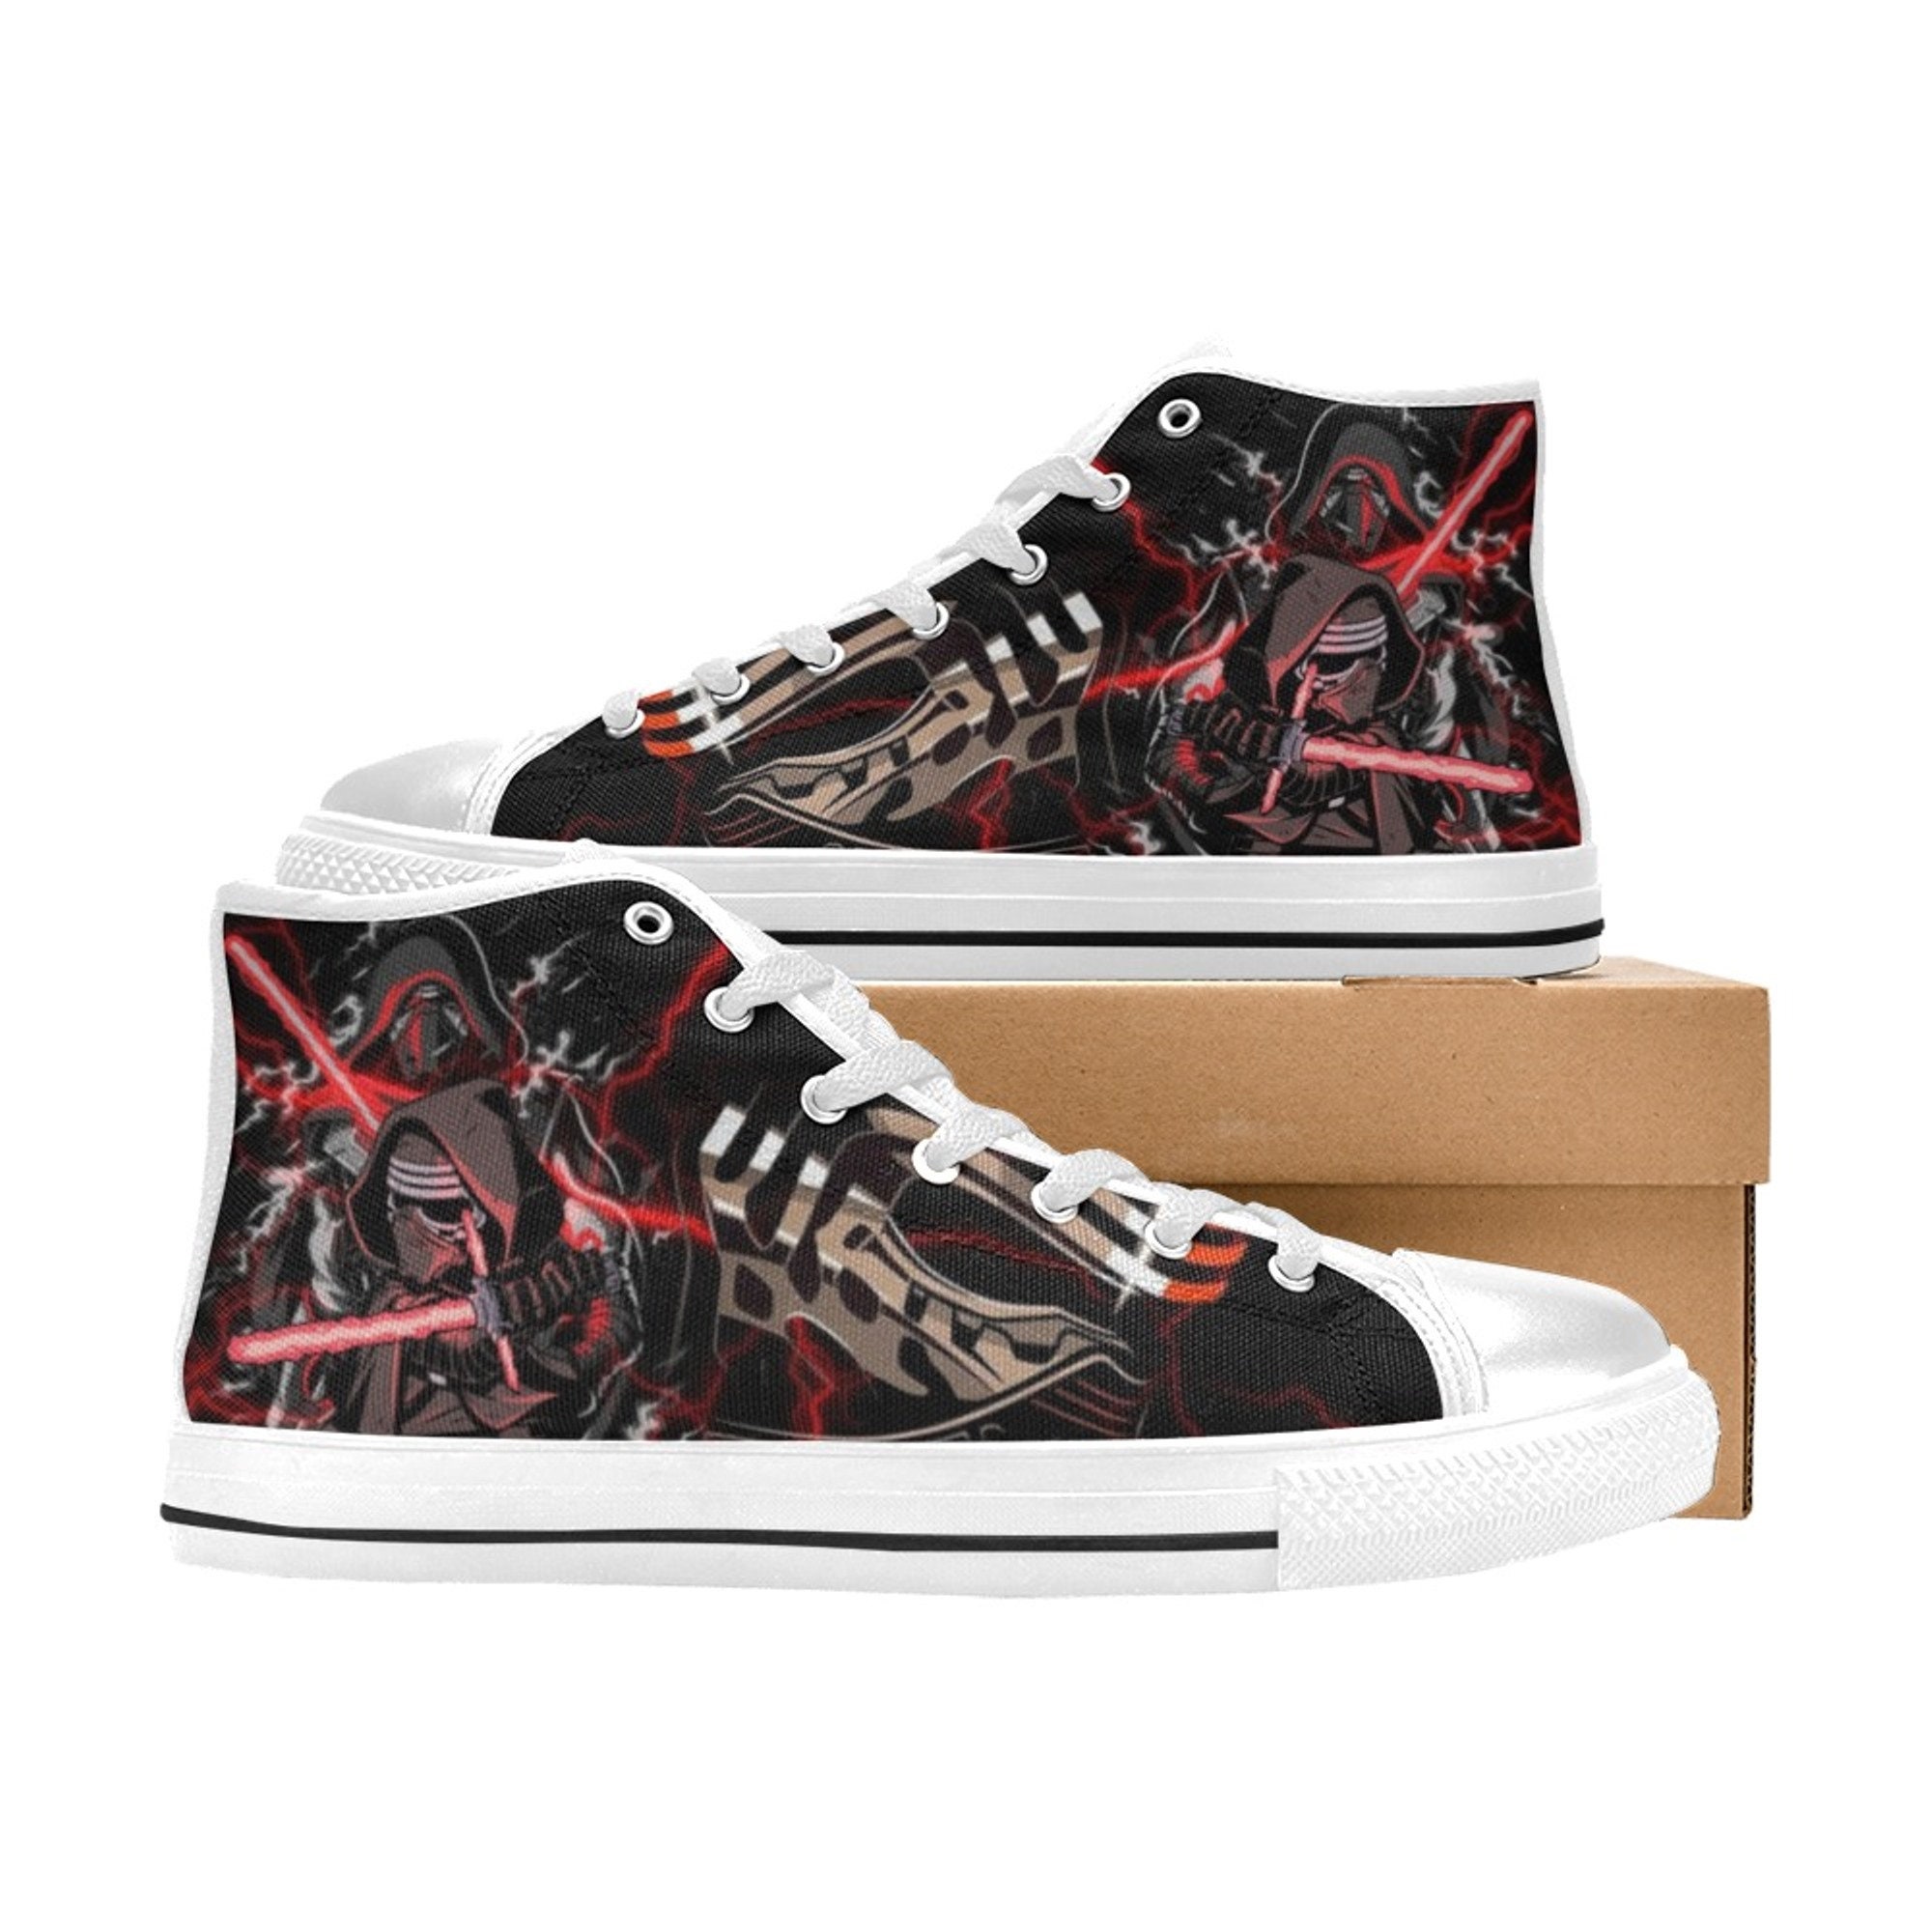 Star Wars Darth Vader Shoes Custom Unisex Adult Shoes, Canvas Shoes High Top